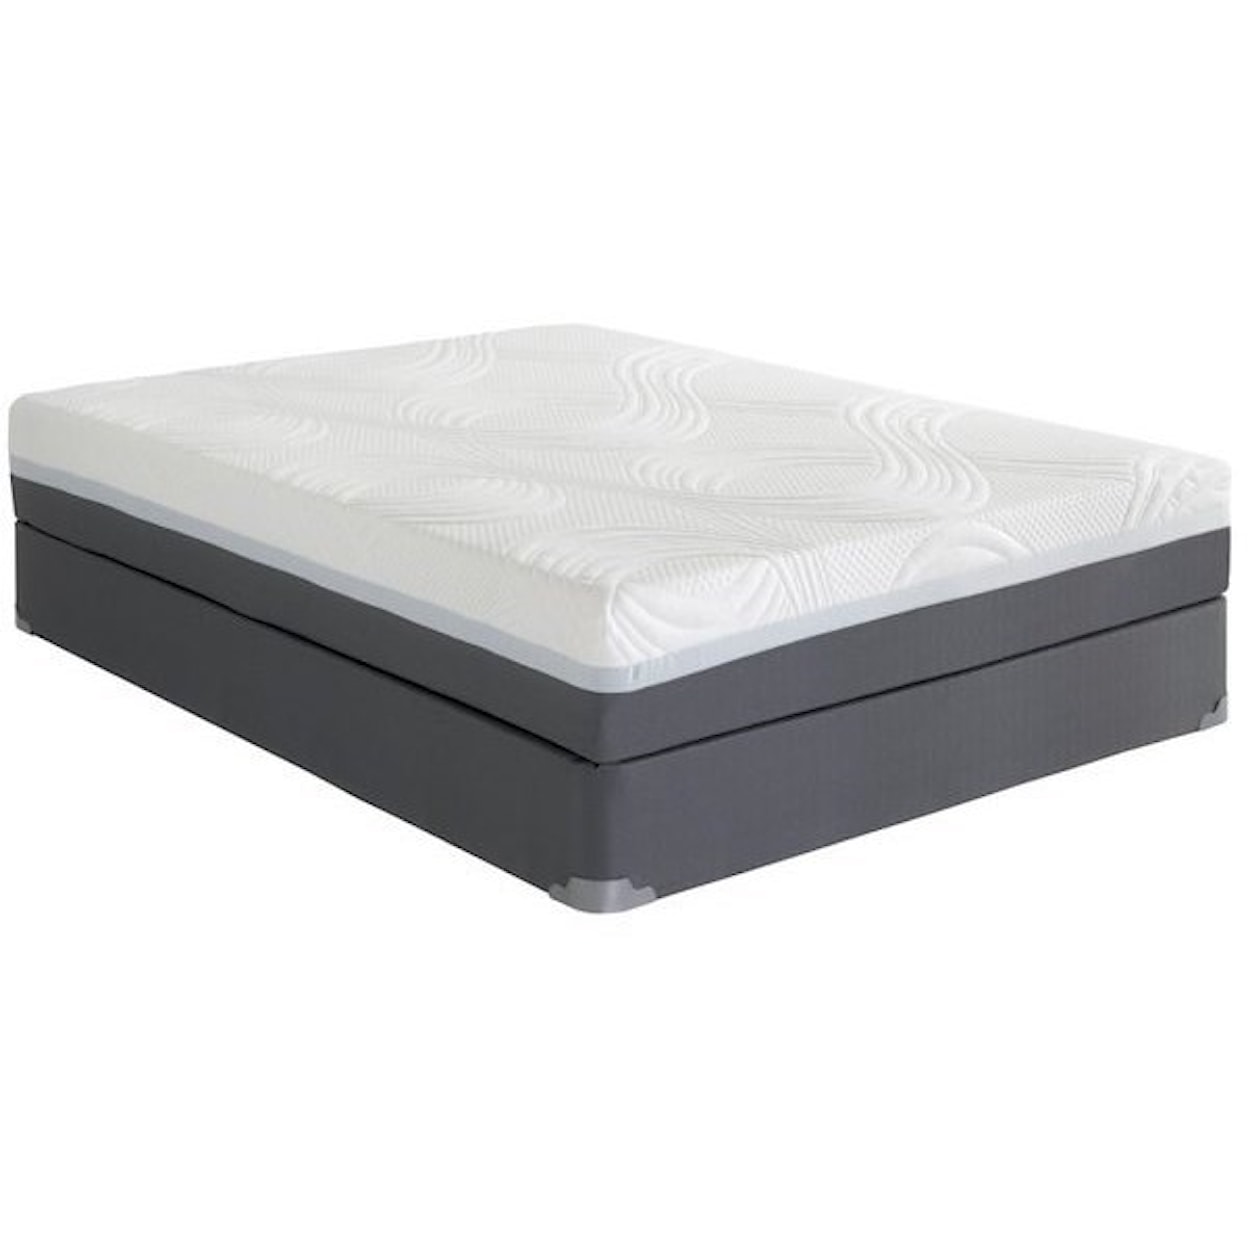 Spring Air Cool Reflections Phase 2 Full Luxury Firm Mattress Set